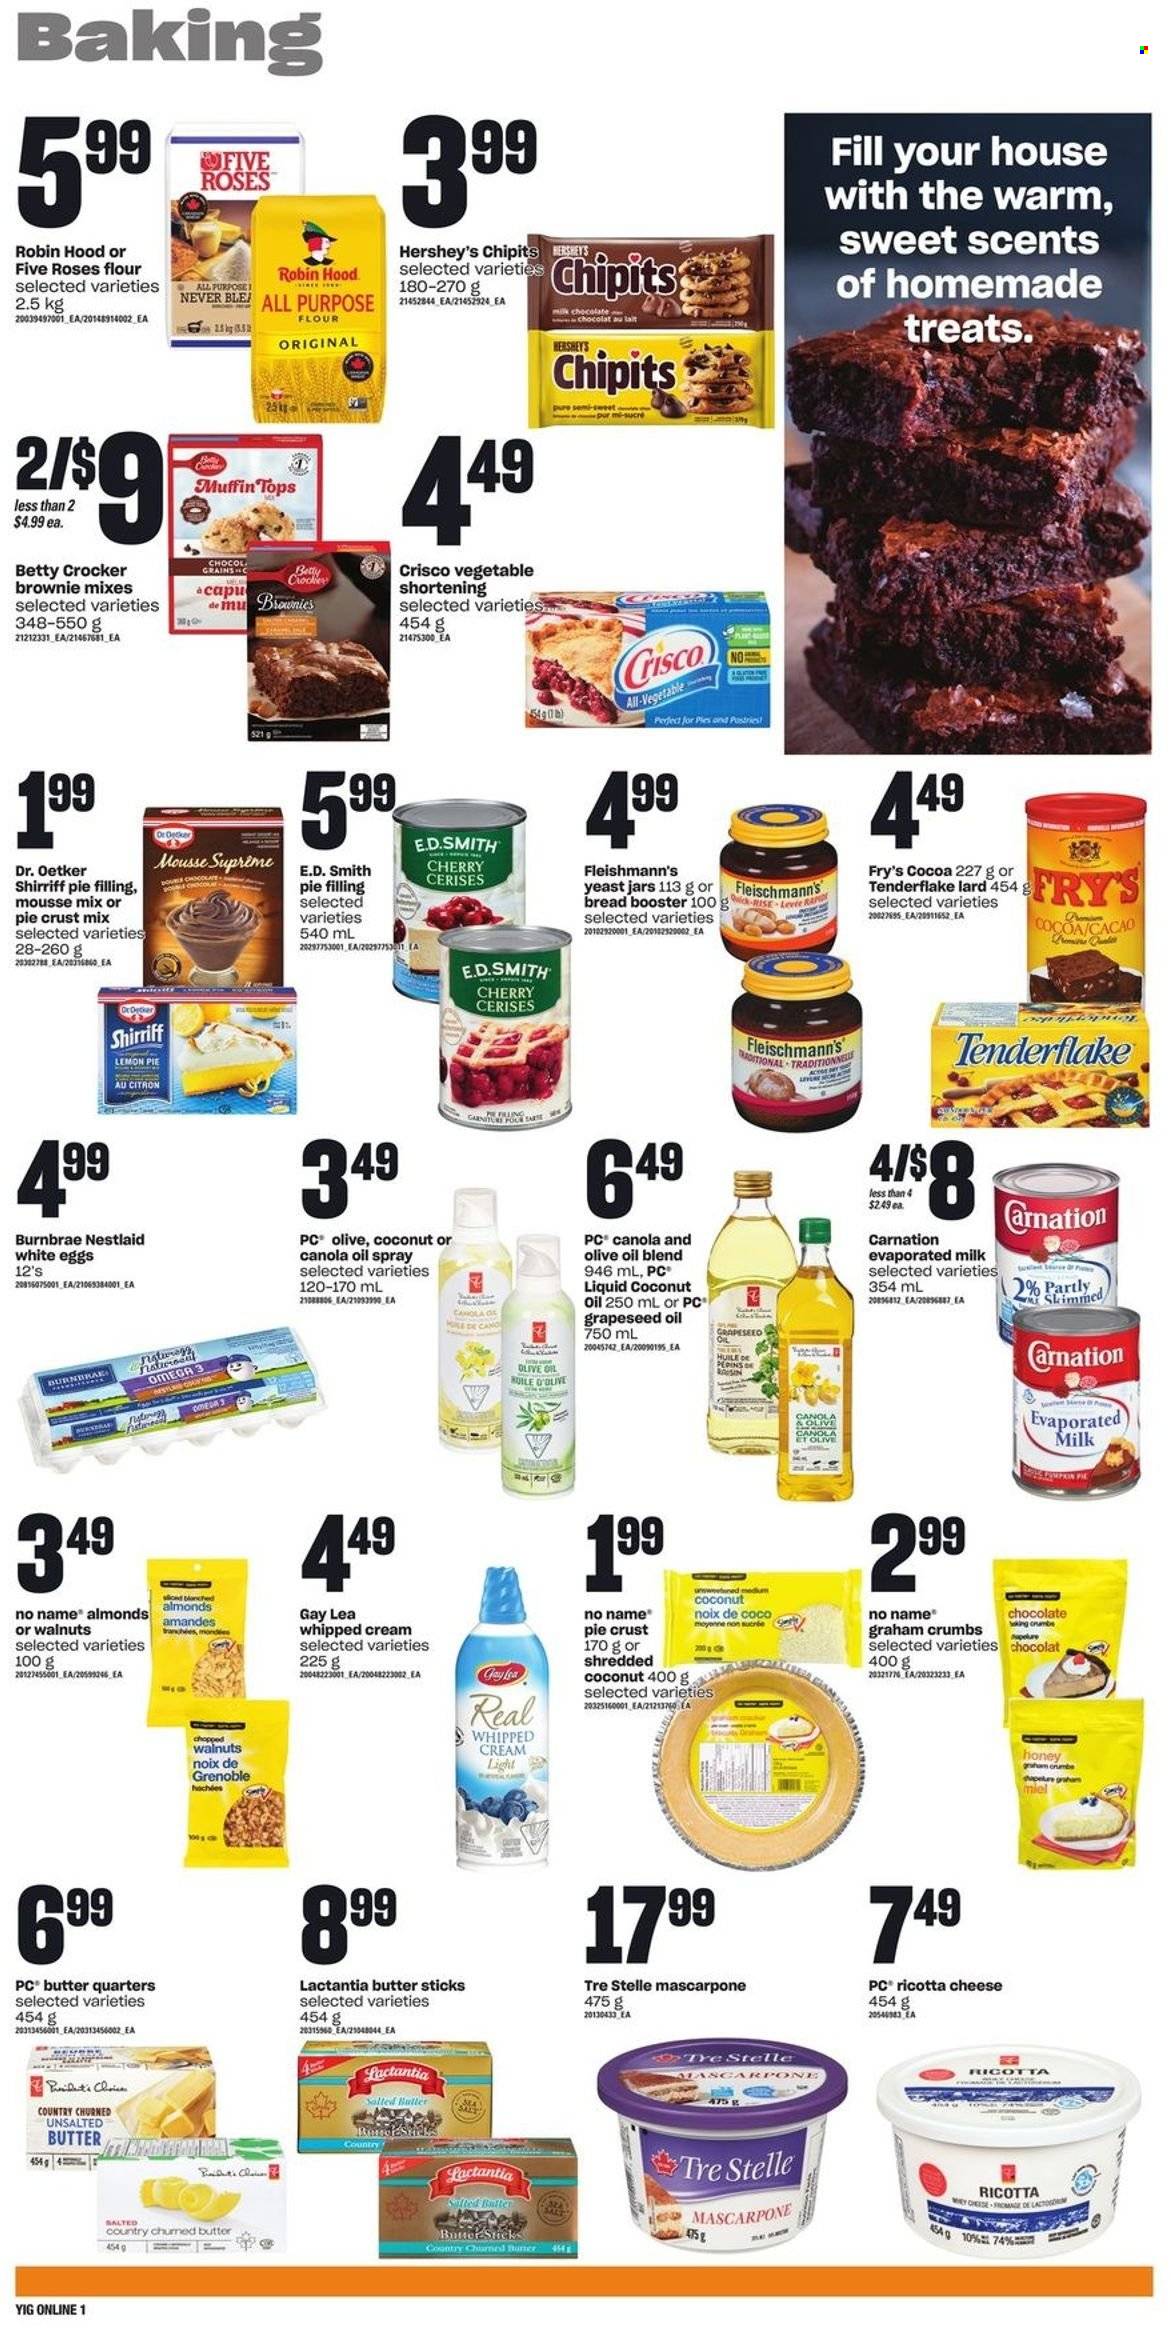 thumbnail - Independent Flyer - March 23, 2023 - March 29, 2023 - Sales products - bread, brownies, muffin, cherries, coconut, No Name, cheese, Dr. Oetker, evaporated milk, eggs, yeast, salted butter, whipped cream, Hershey's, milk chocolate, chocolate, cocoa, Crisco, flour, shortening, pie crust, pie filling, canola oil, olive oil, oil, grape seed oil, honey, almonds, walnuts, shredded coconut, jar, Omega-3, lard, mascarpone, ricotta. Page 5.